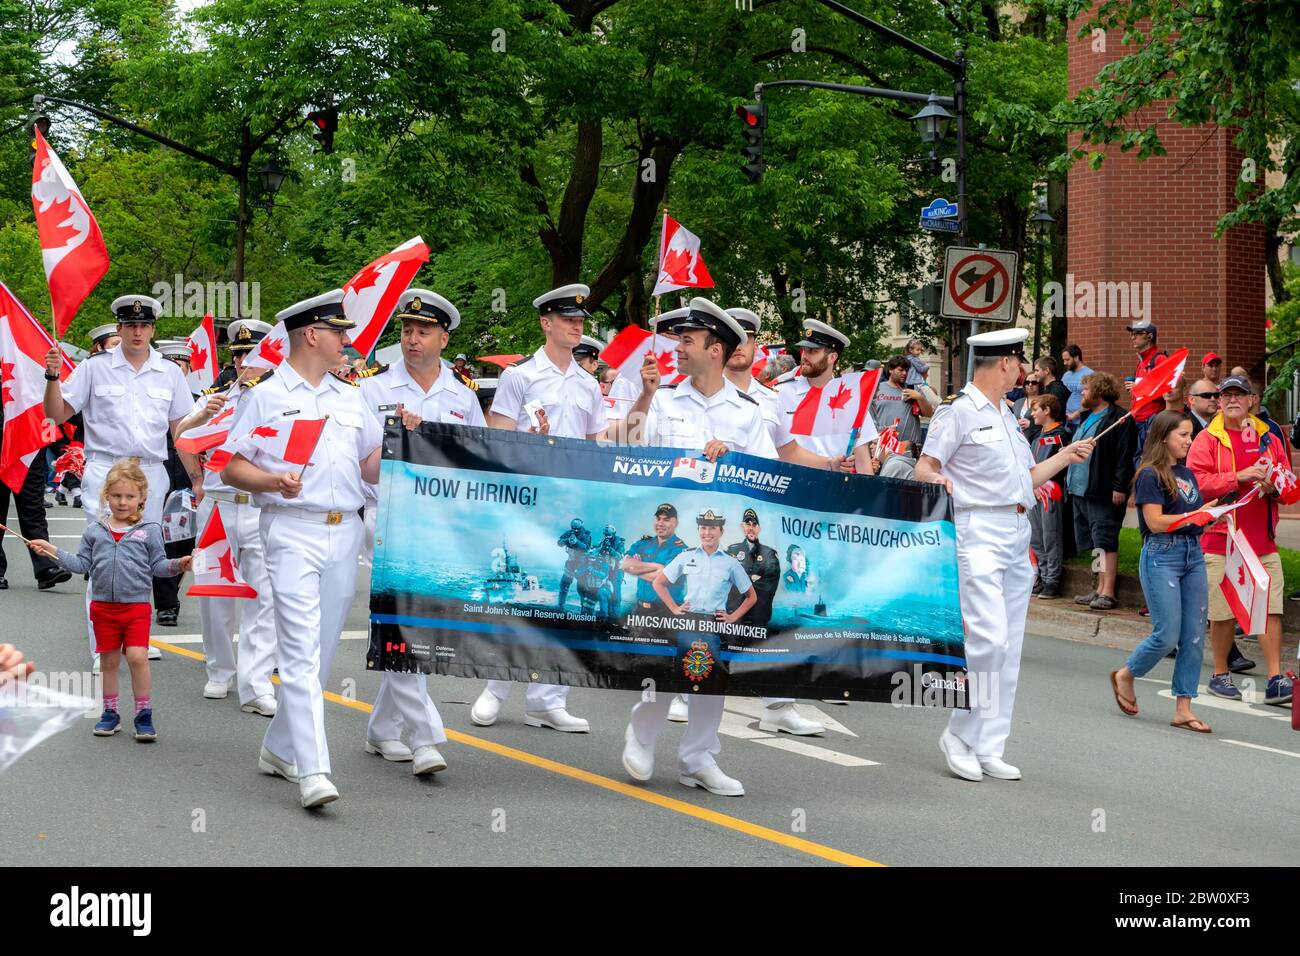 Saint John, New Brunswick, Canada - July 1, 2019: Naval officers participate in the Canada Day parade. The carry a recruiting banner. Stock Photo